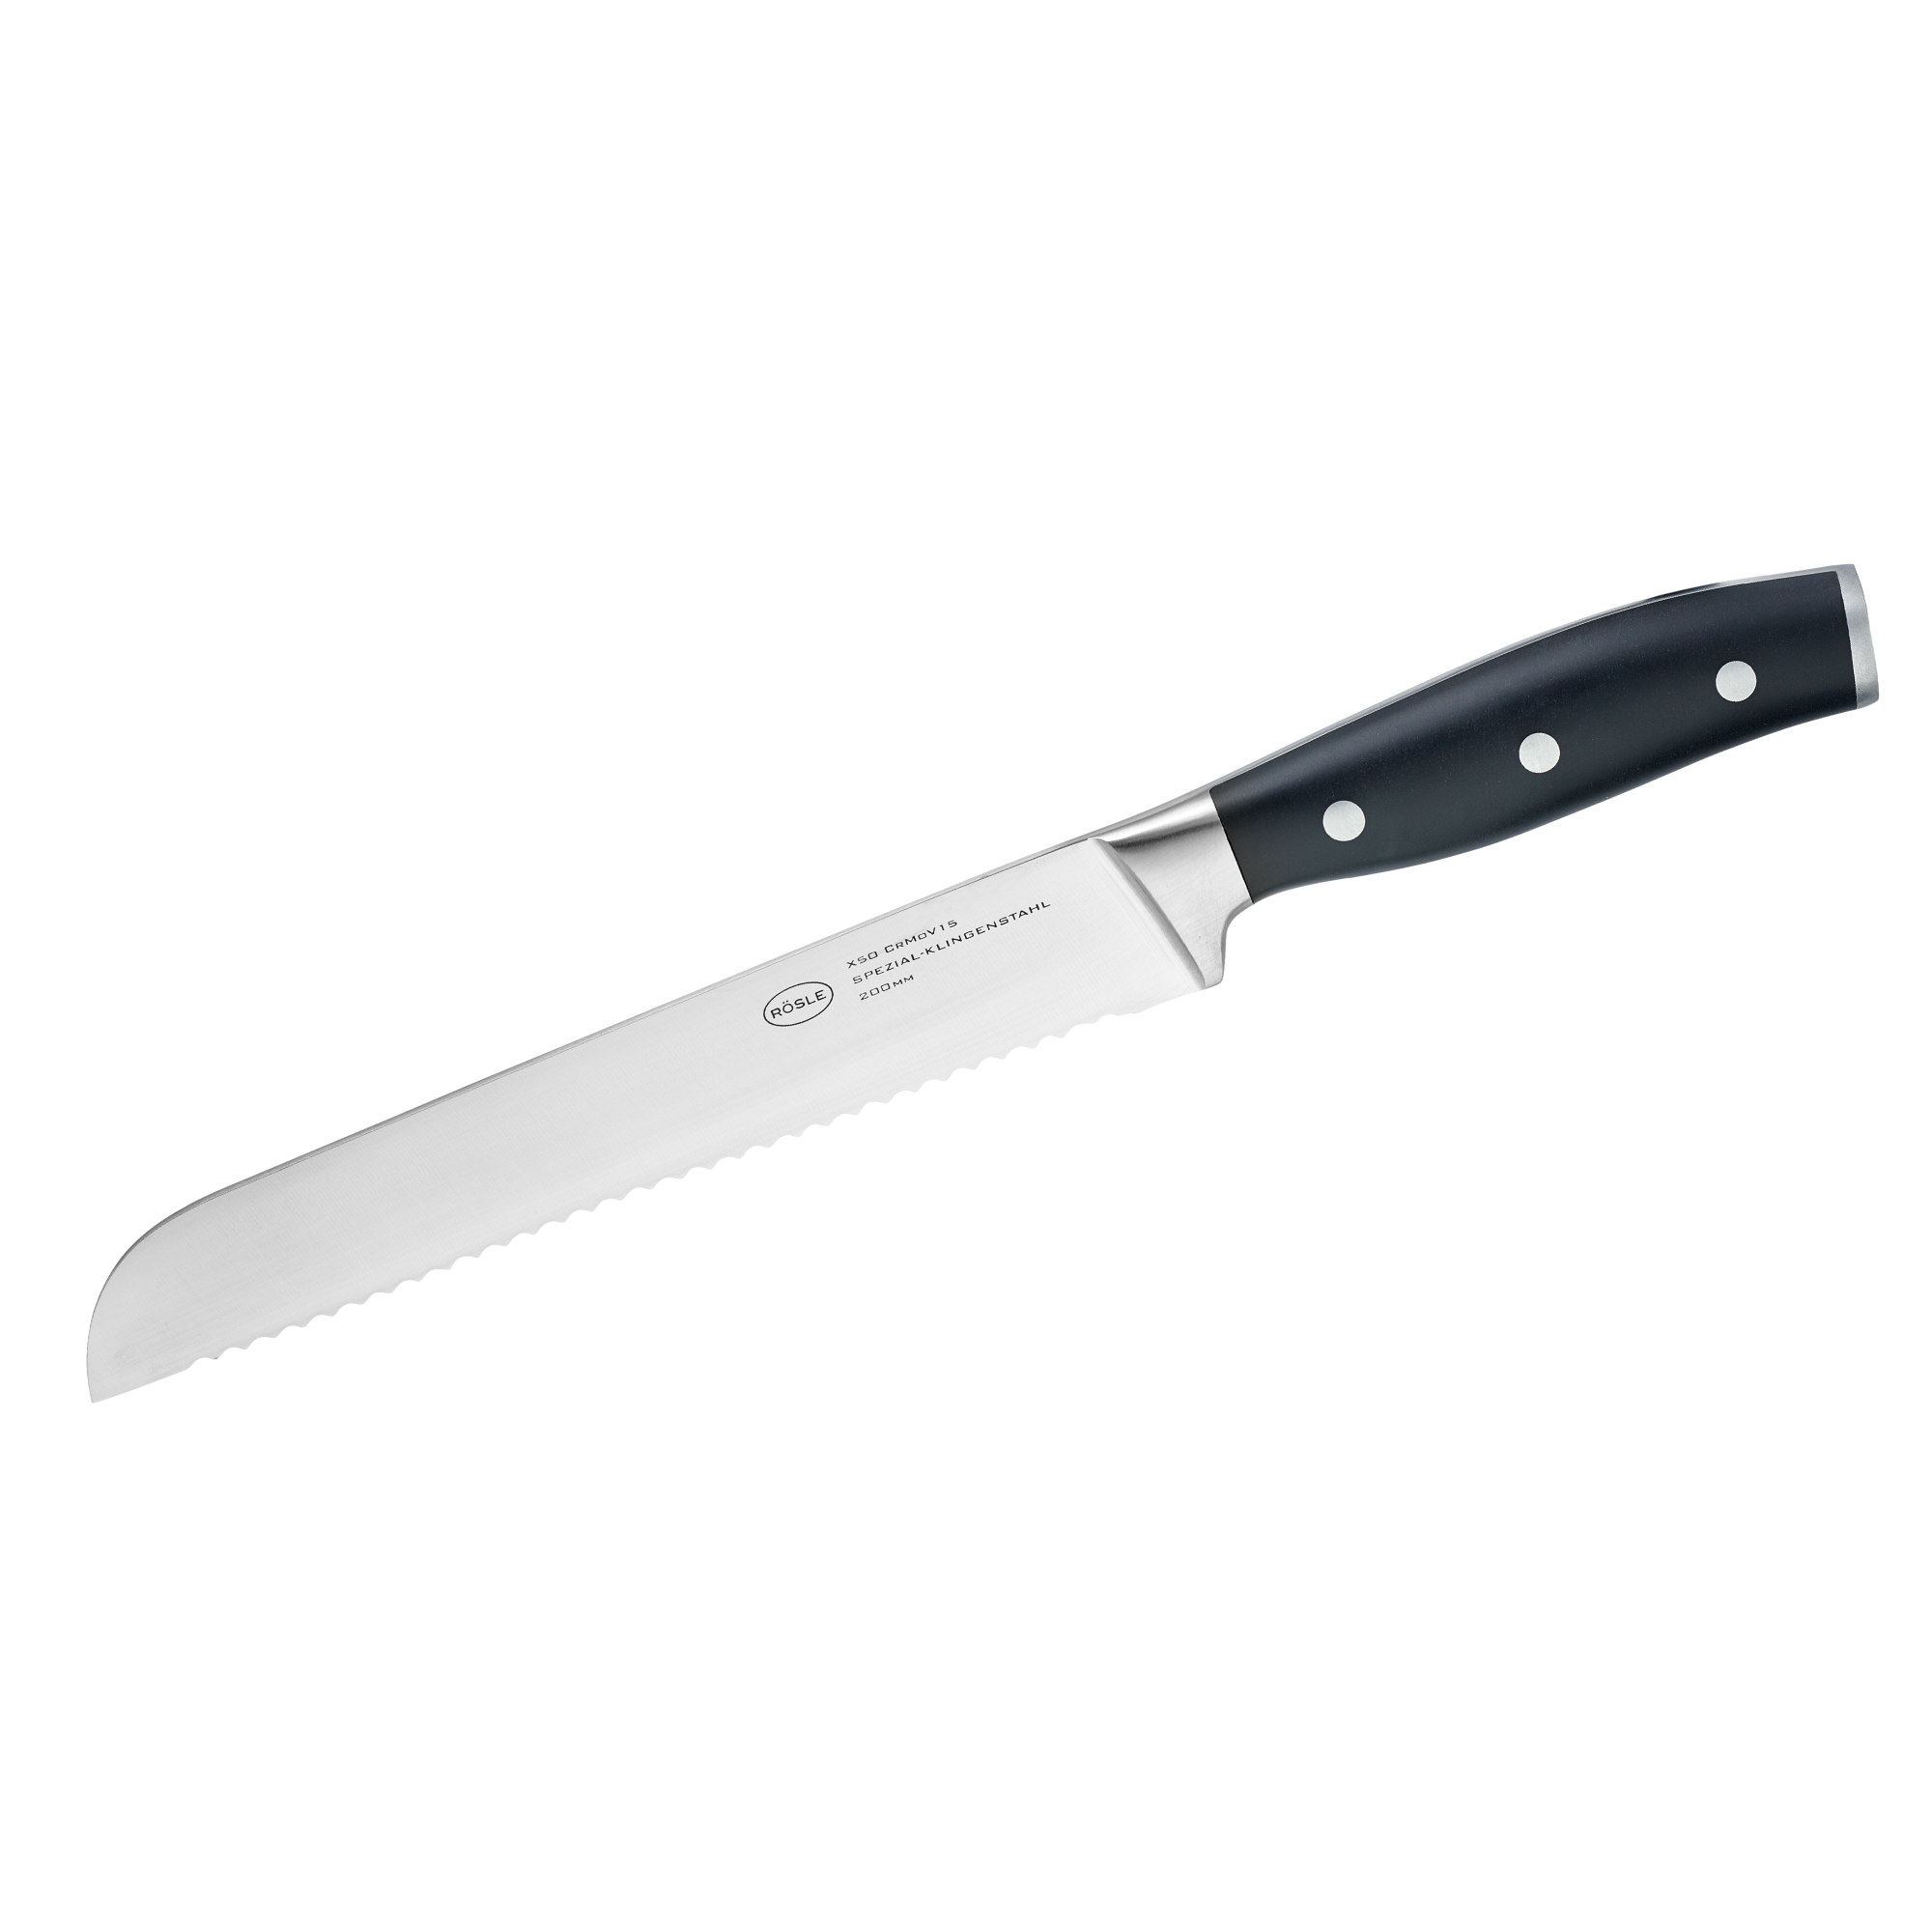 Bread knife Tradition serrated 20 cm